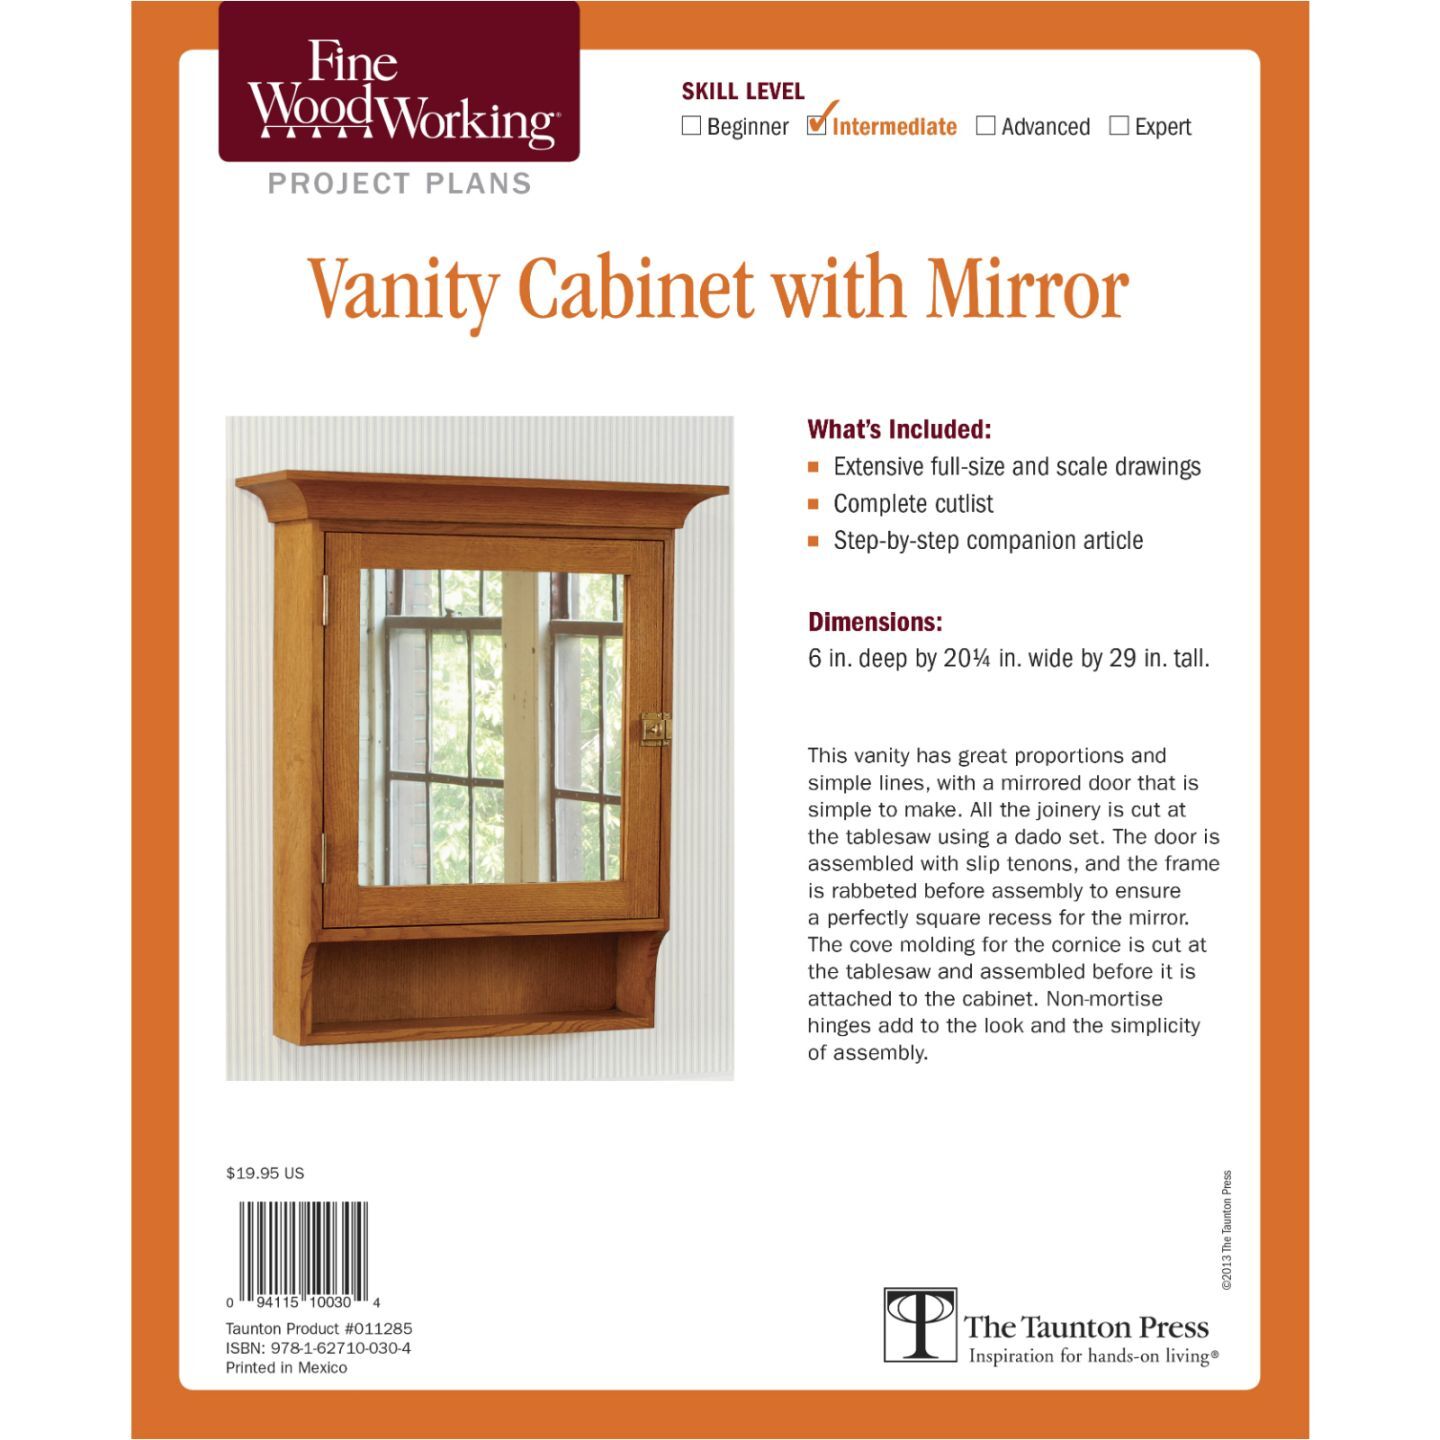 Vanity Cabinet with Mirror Plan